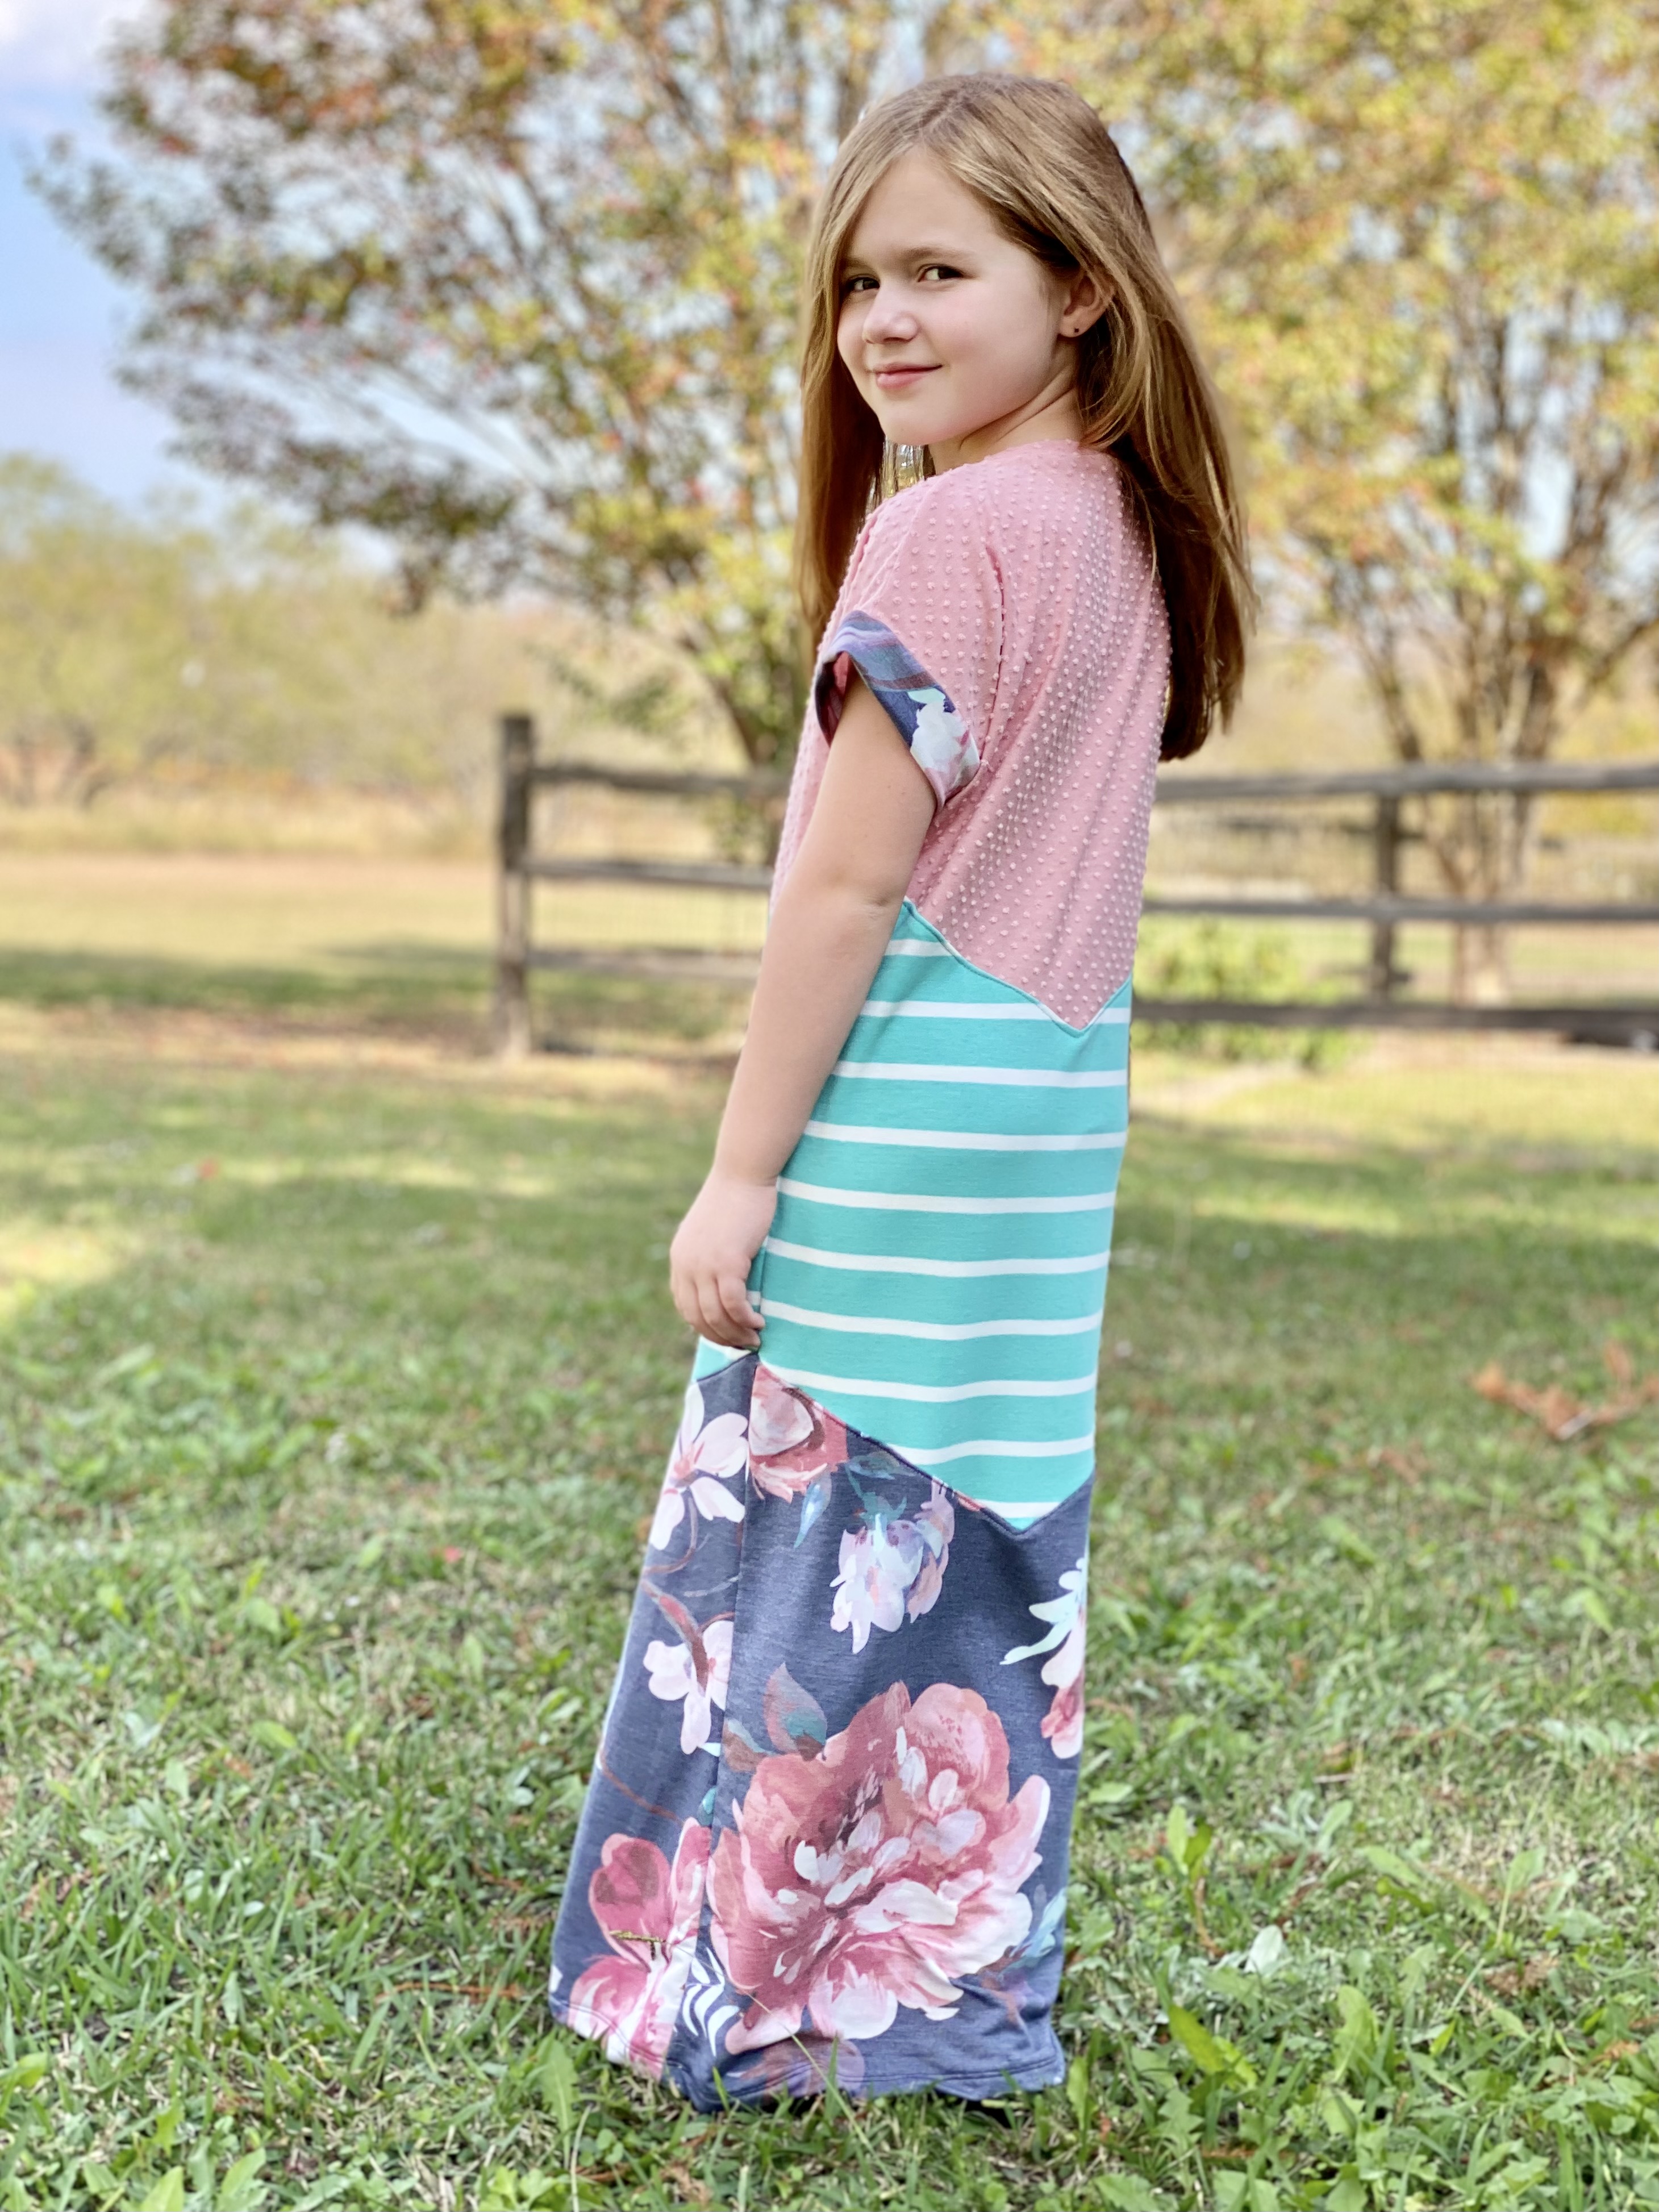 Valley's Top, Tunic Dress, Midi and Maxi Sizes 2T to 14 Kids PDF Pattern